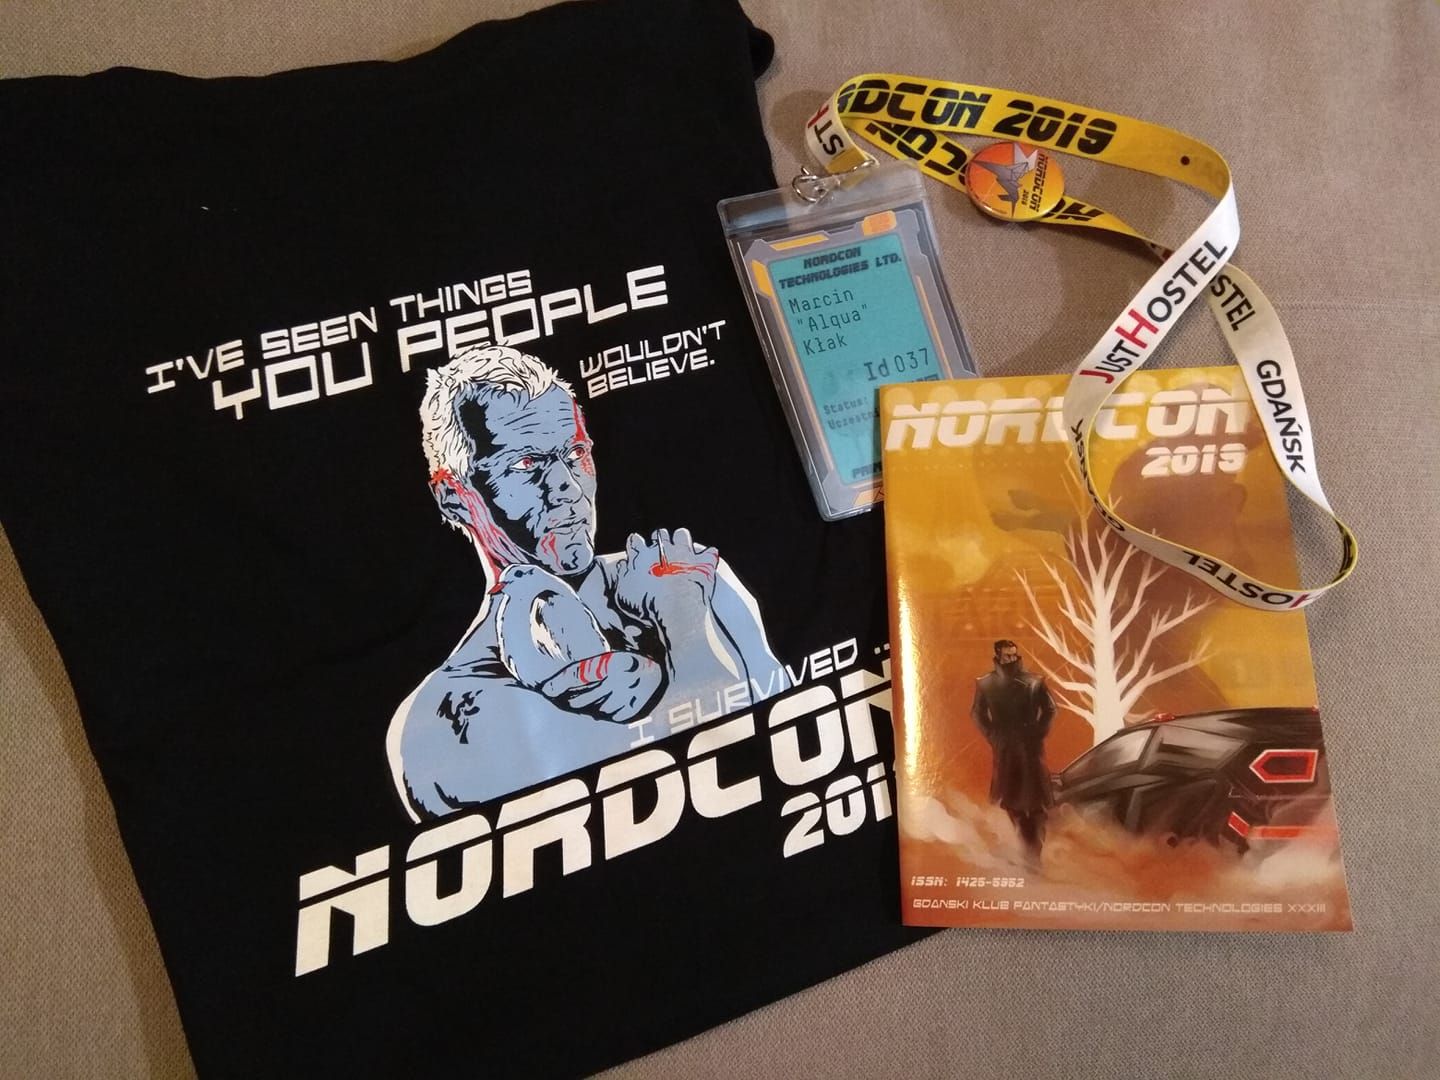 Convention t-shirt, badge with lanyard and Programme book. T-shirt shows a portrait inspired by Roy Batty from Blade runner movie and an inscription 'I've seen things you people wouldn't believe. I survived Nordcon 2019'.